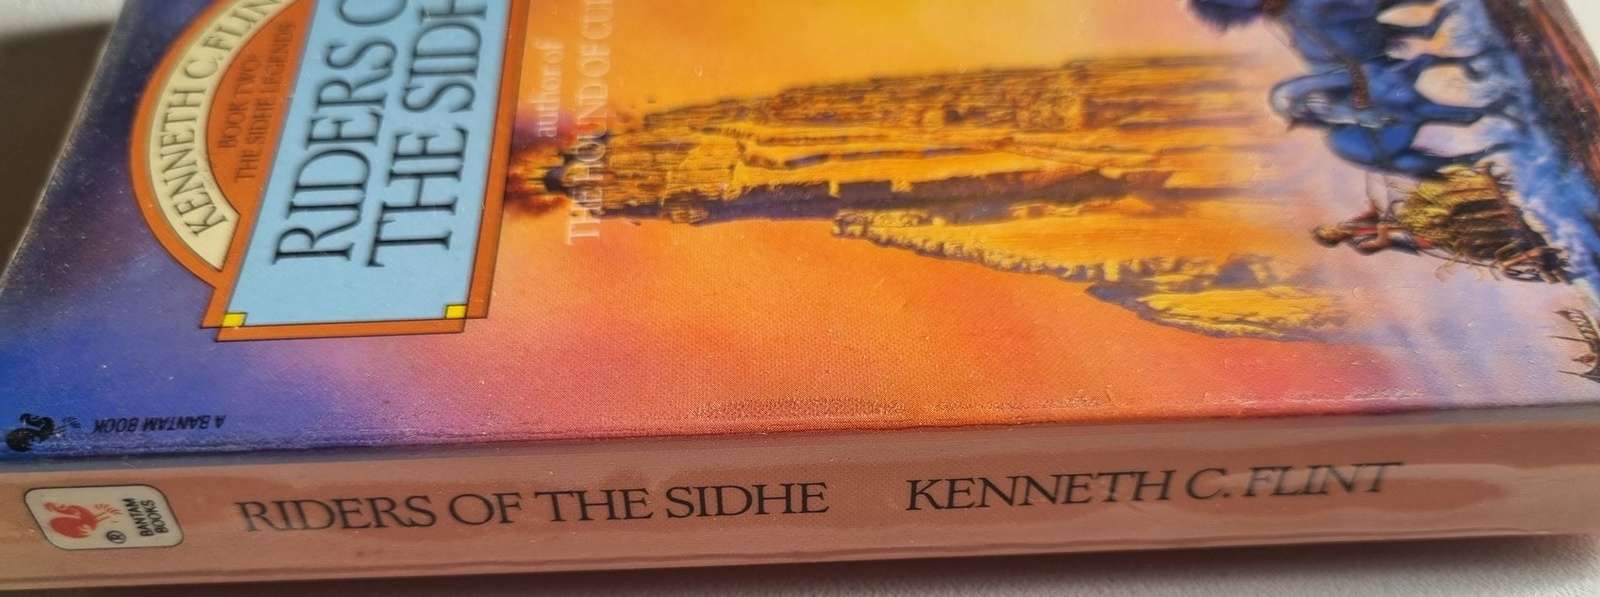 Riders of the Sidhe - Kenneth C. Flint